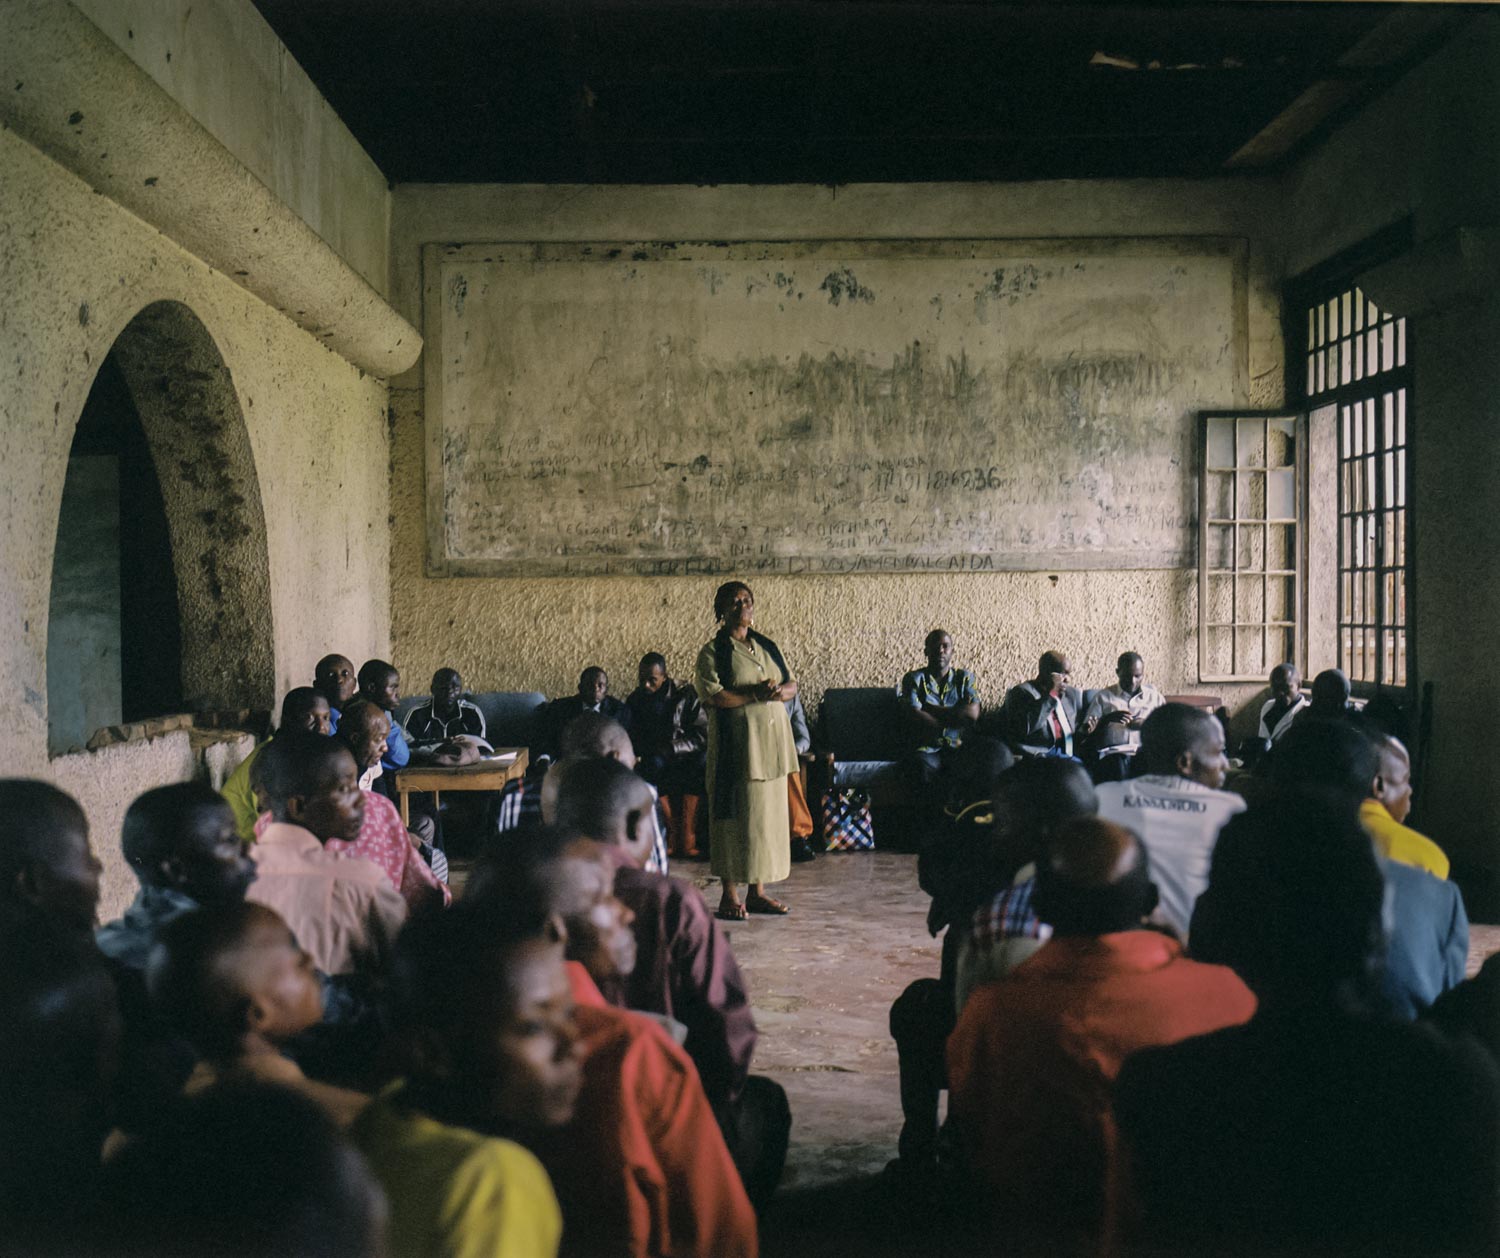  Henriette Useni Kabake, Lulingu's government administrator, hosts a town meeting alongside traditional and Raia Mutomboki leaders inside a decayed building from the Belgian colonial era. The Raia Mutomboki insist they should not be labeled “rebels” 